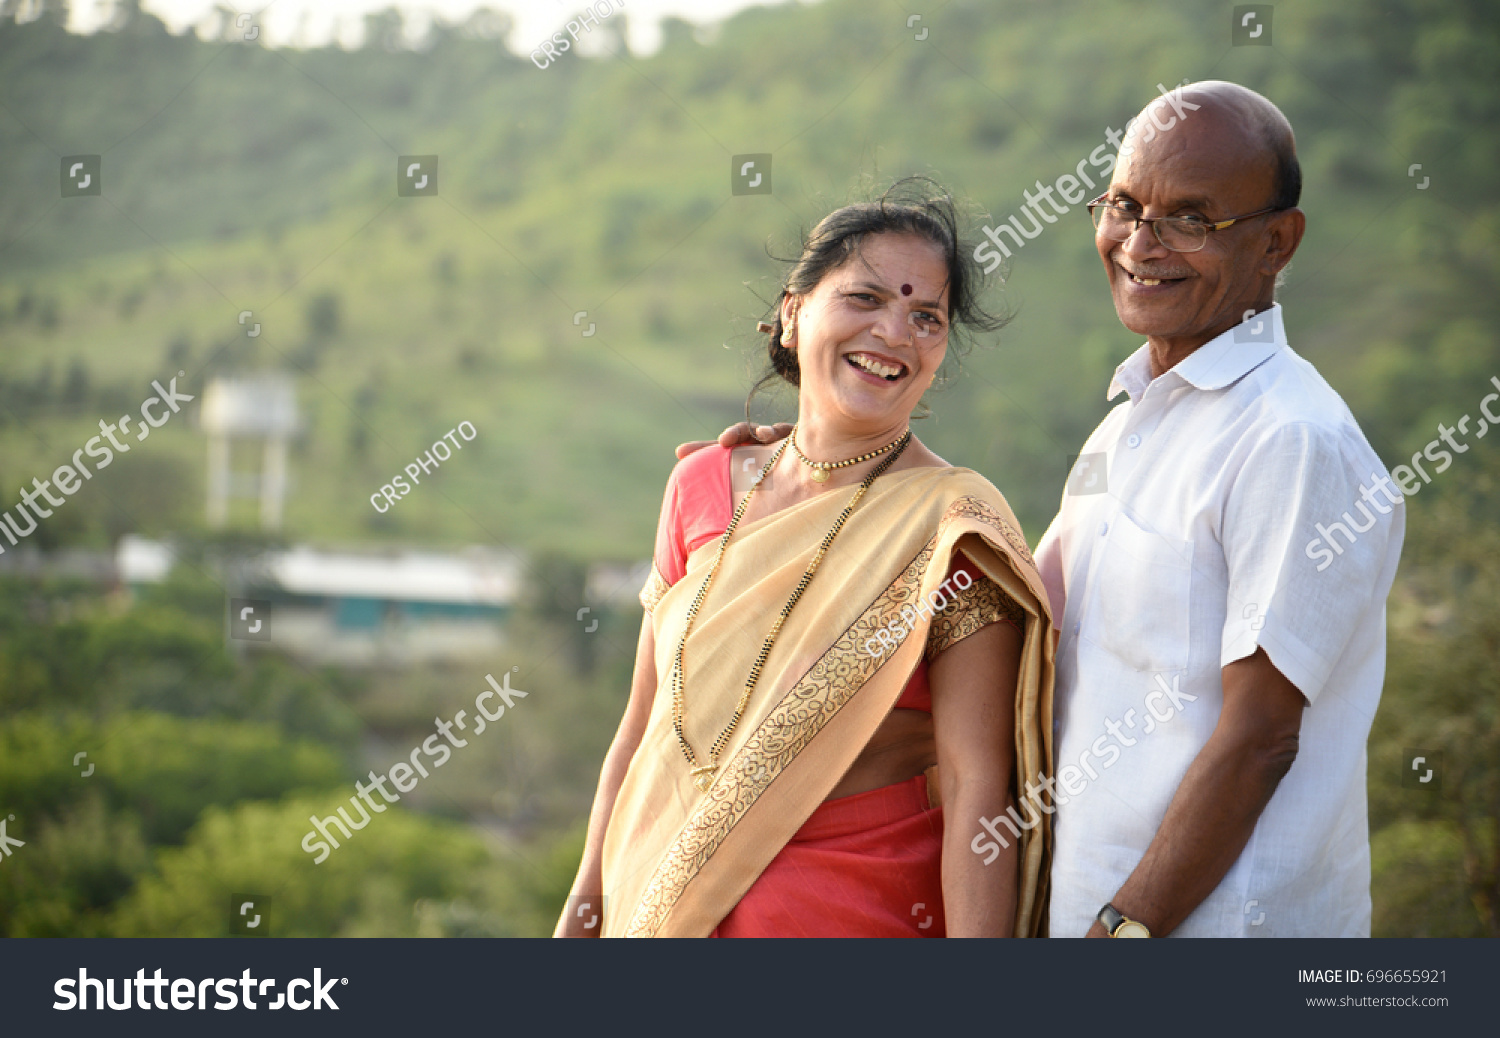 portrait of happy senior couple husband and wife wearing Indian clothing. #696655921